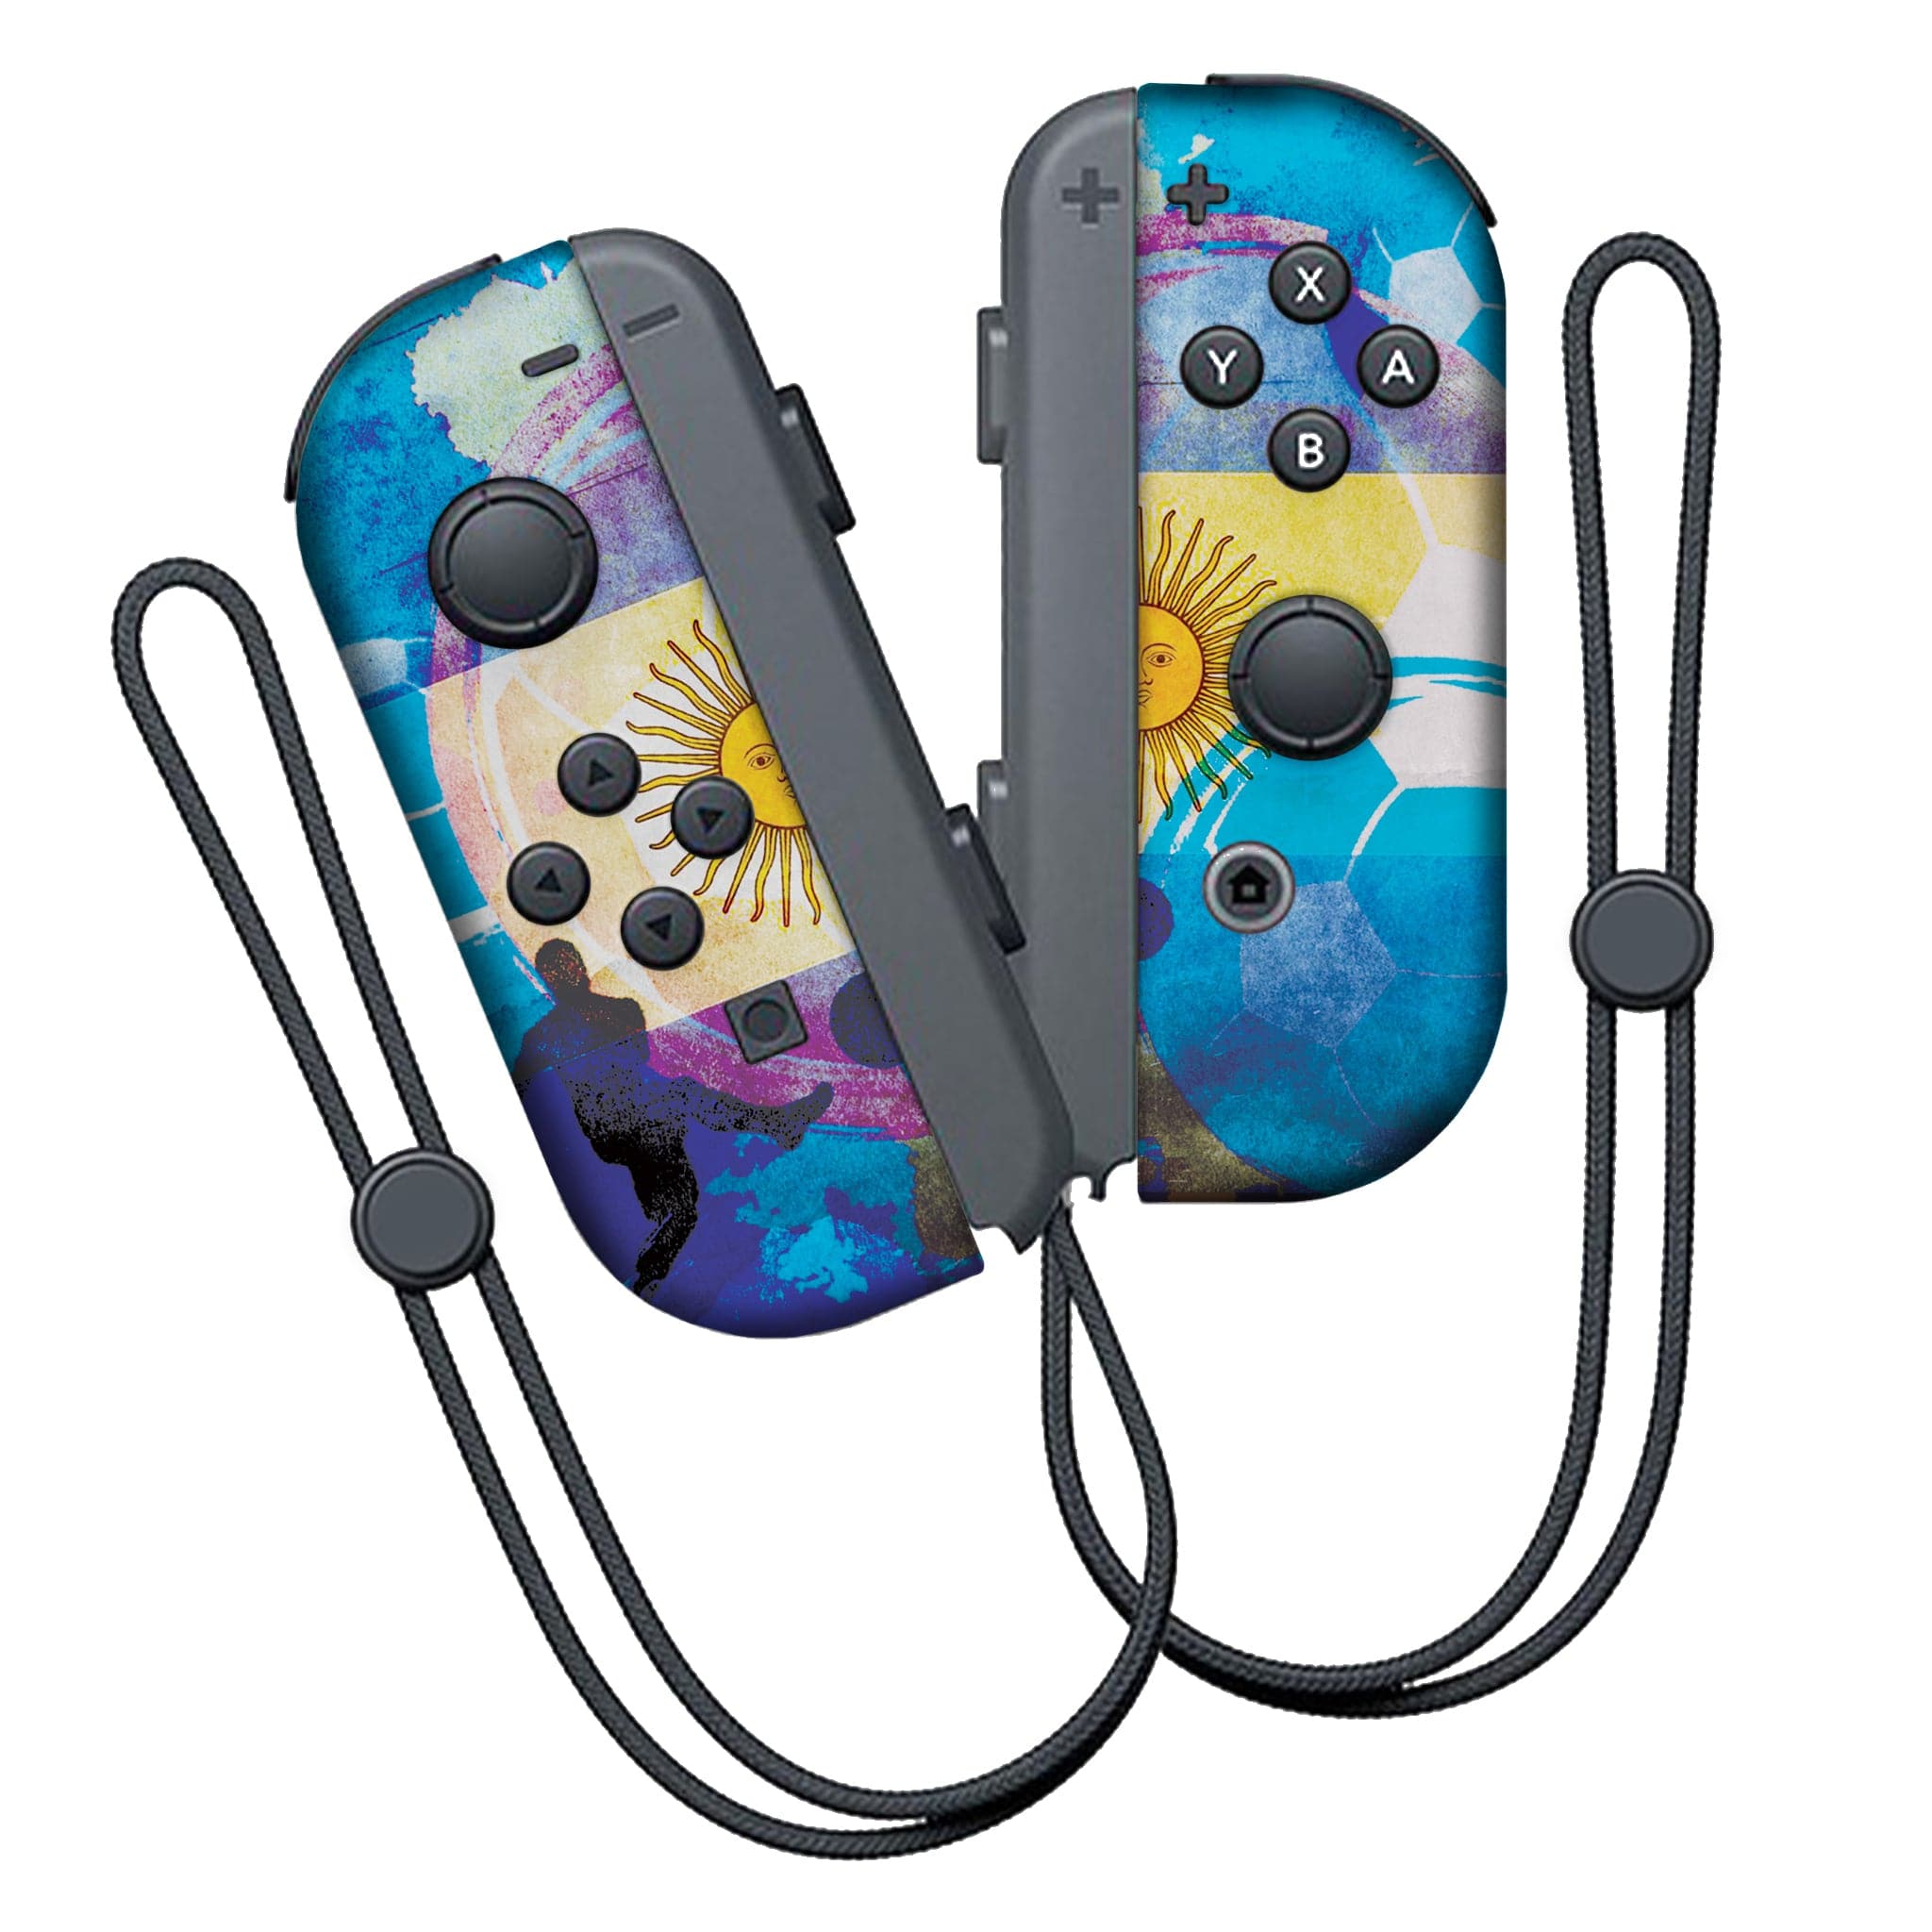 Argentina Inspired Nintendo Switch Joy-Con Left and Right Switch Controllers by Nintendo